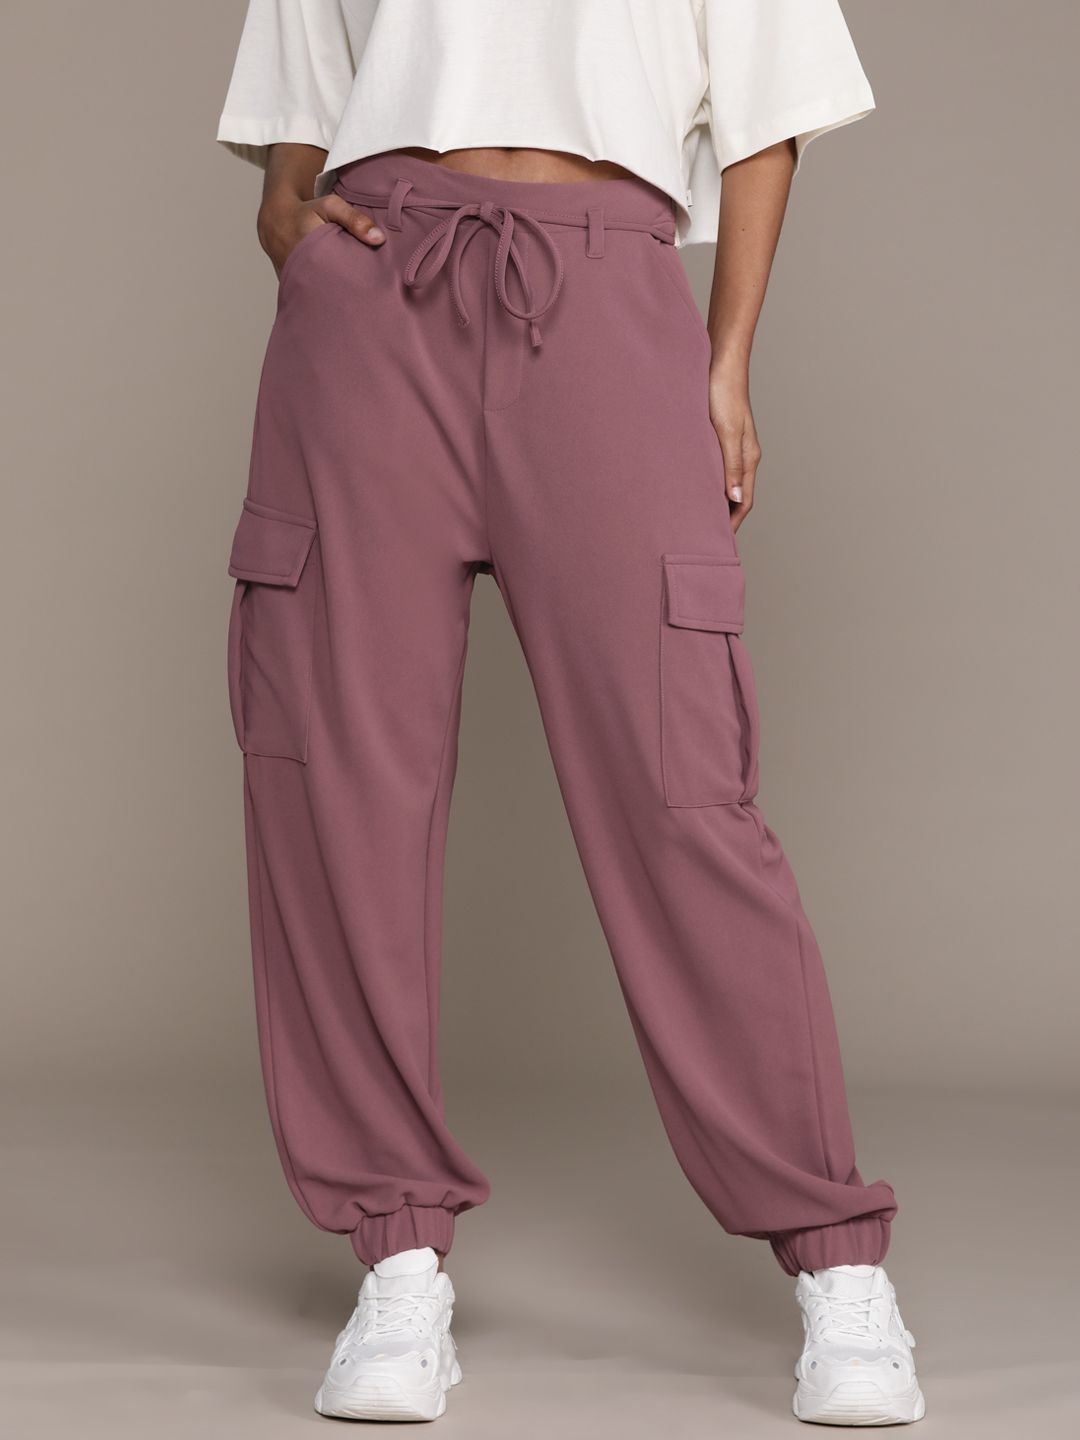 The Roadster Lifestyle Co. Women Cargo Joggers Price in India